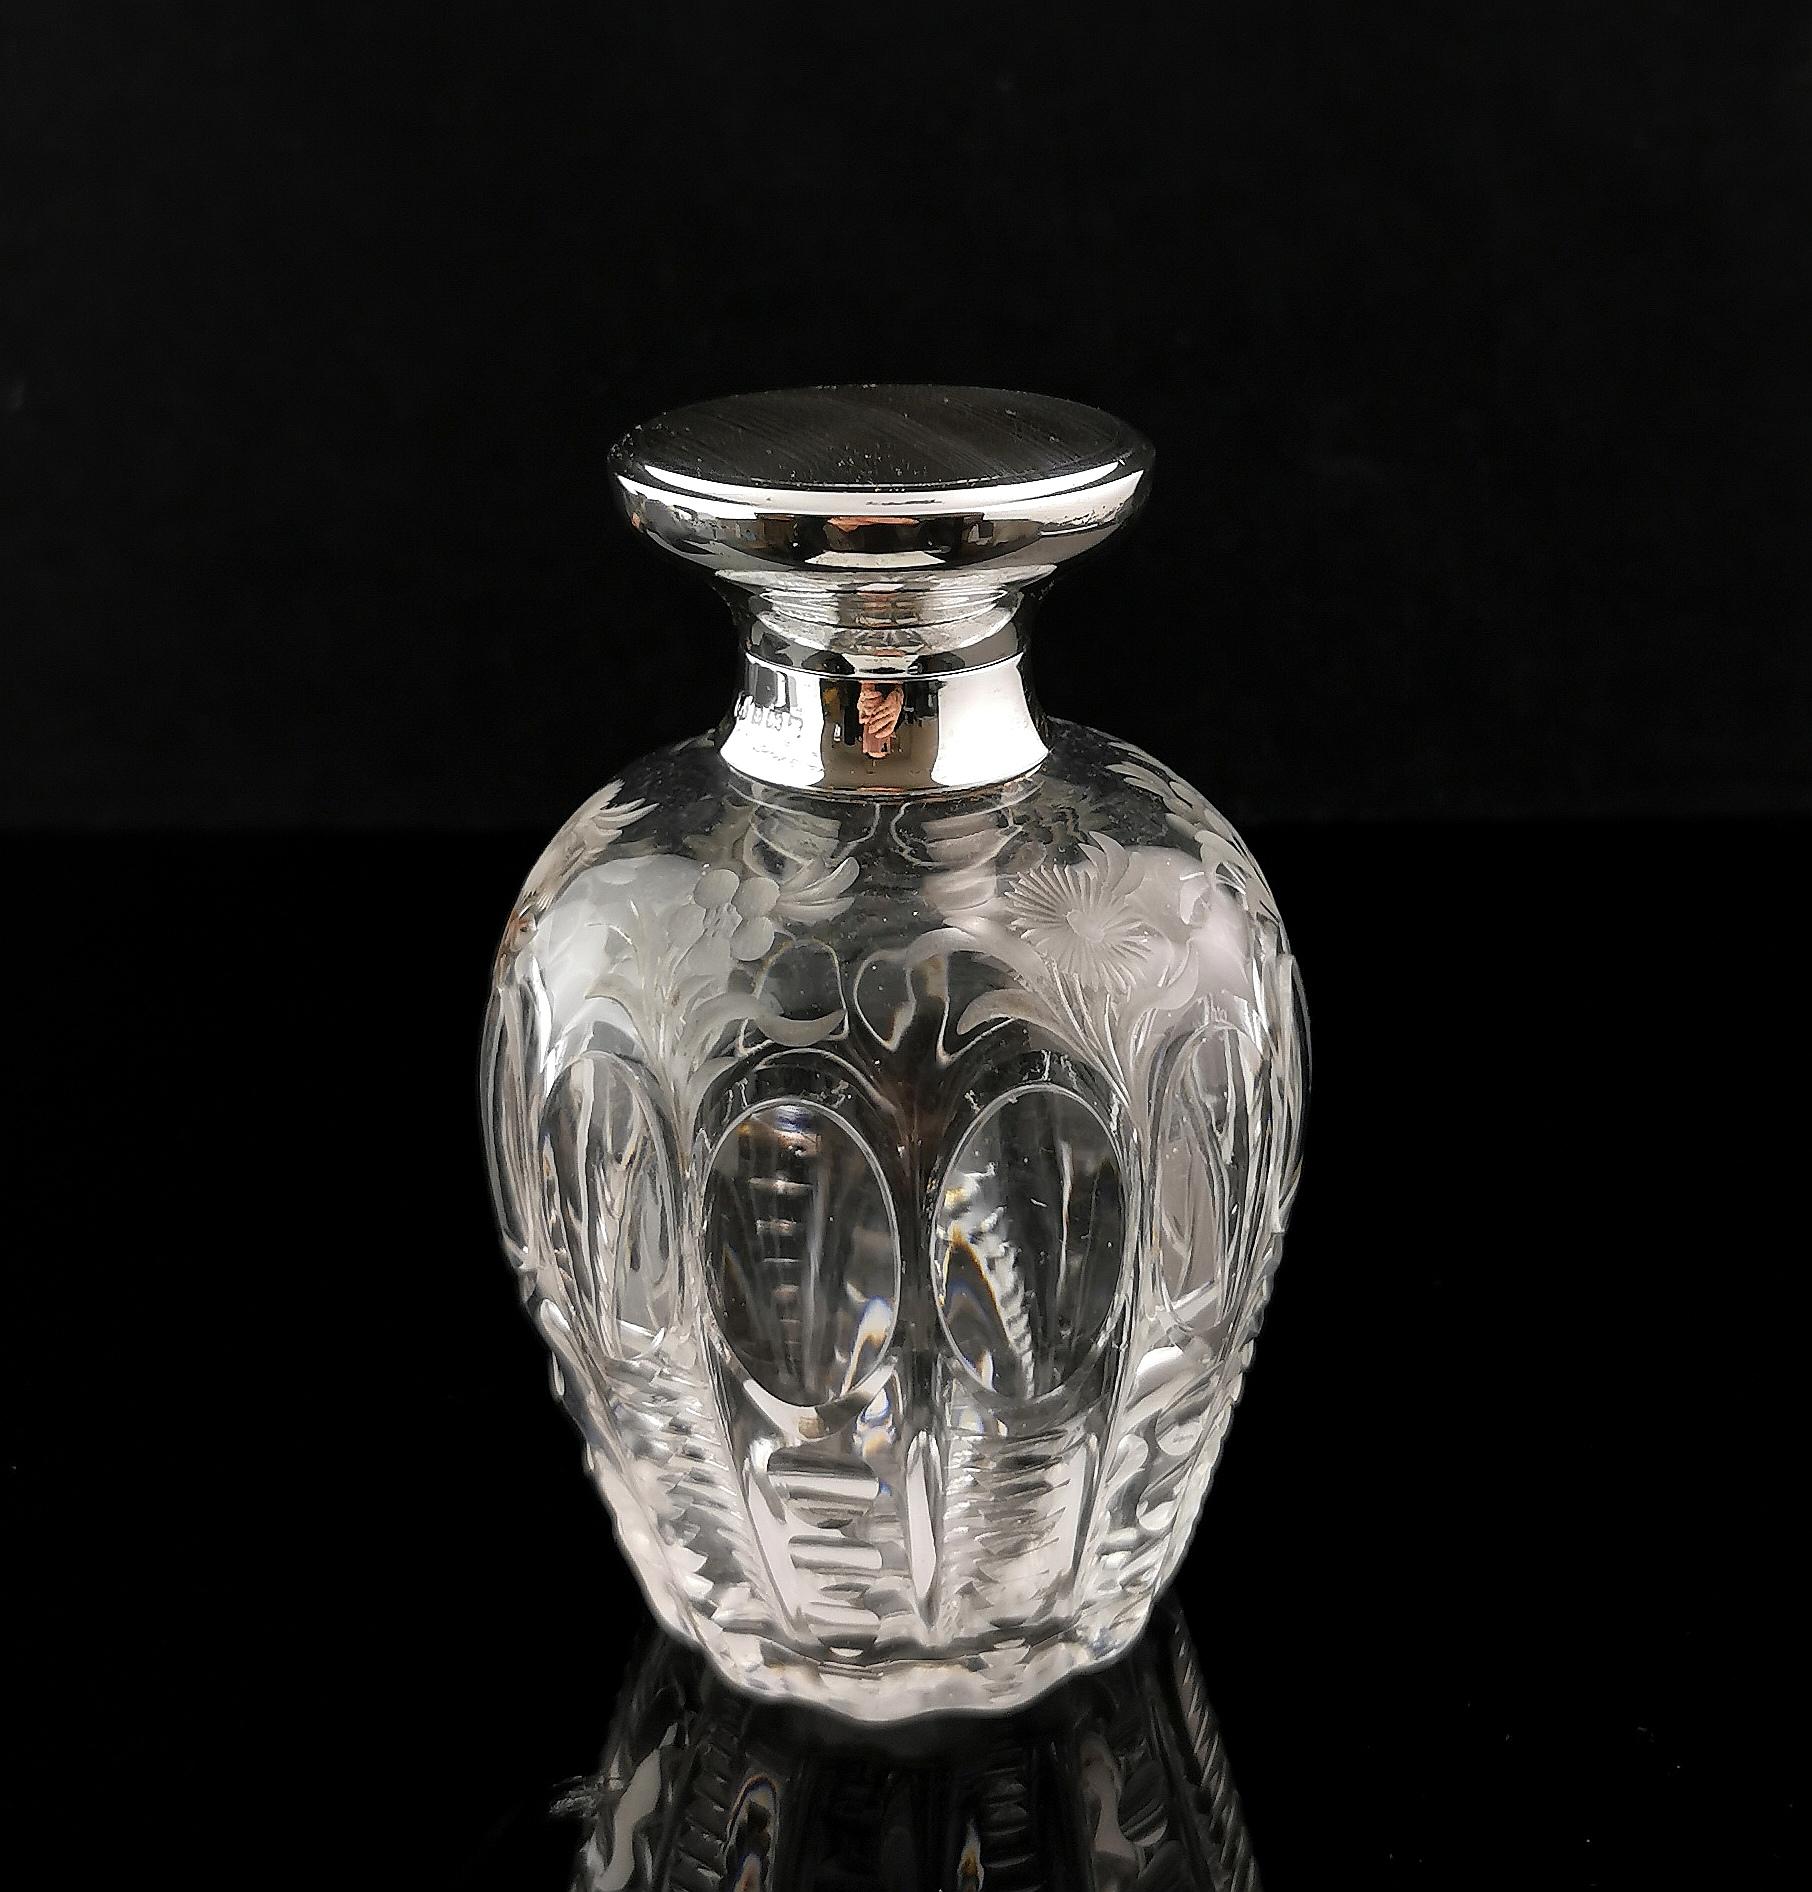 A truly stunning antique Art Deco era scent bottle.

It is a large ovoid shaped bottle with lobed sides and with a delicate, pretty floral design etched into the top sections of the body.

The lid is made from sterling silver with an engine turned